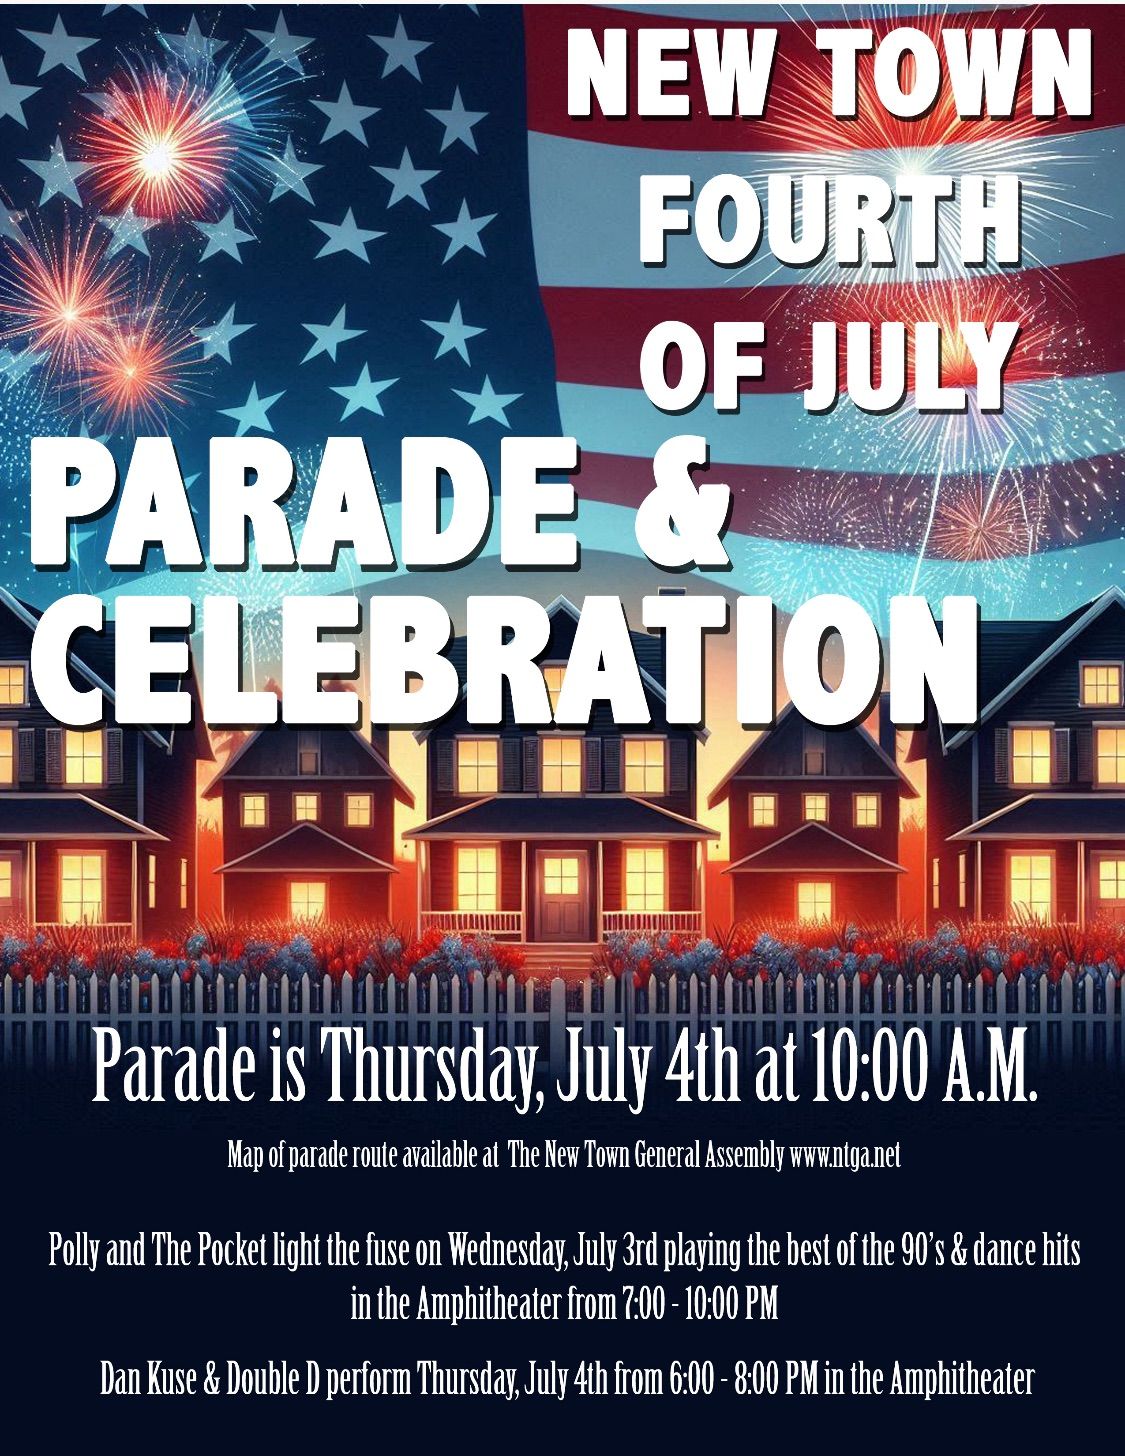 Parade - July 4th in New Town